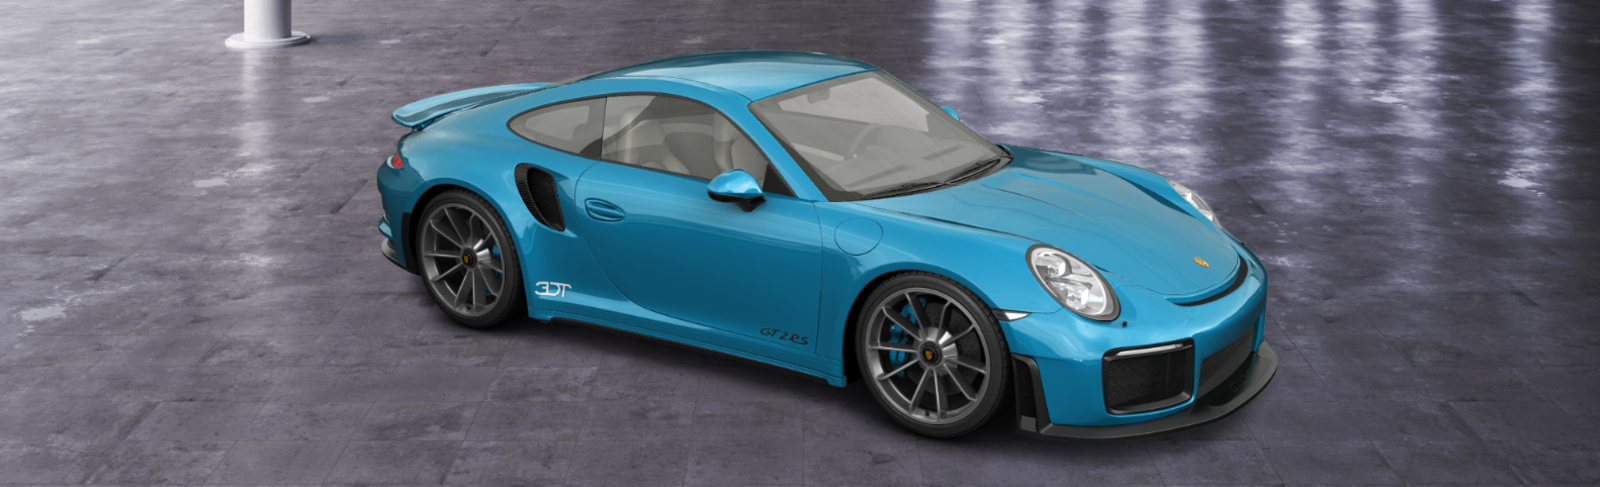 Illustration for article titled Thanks to 3DTuning, I was able to create the Porsche 911 Turbo RS.